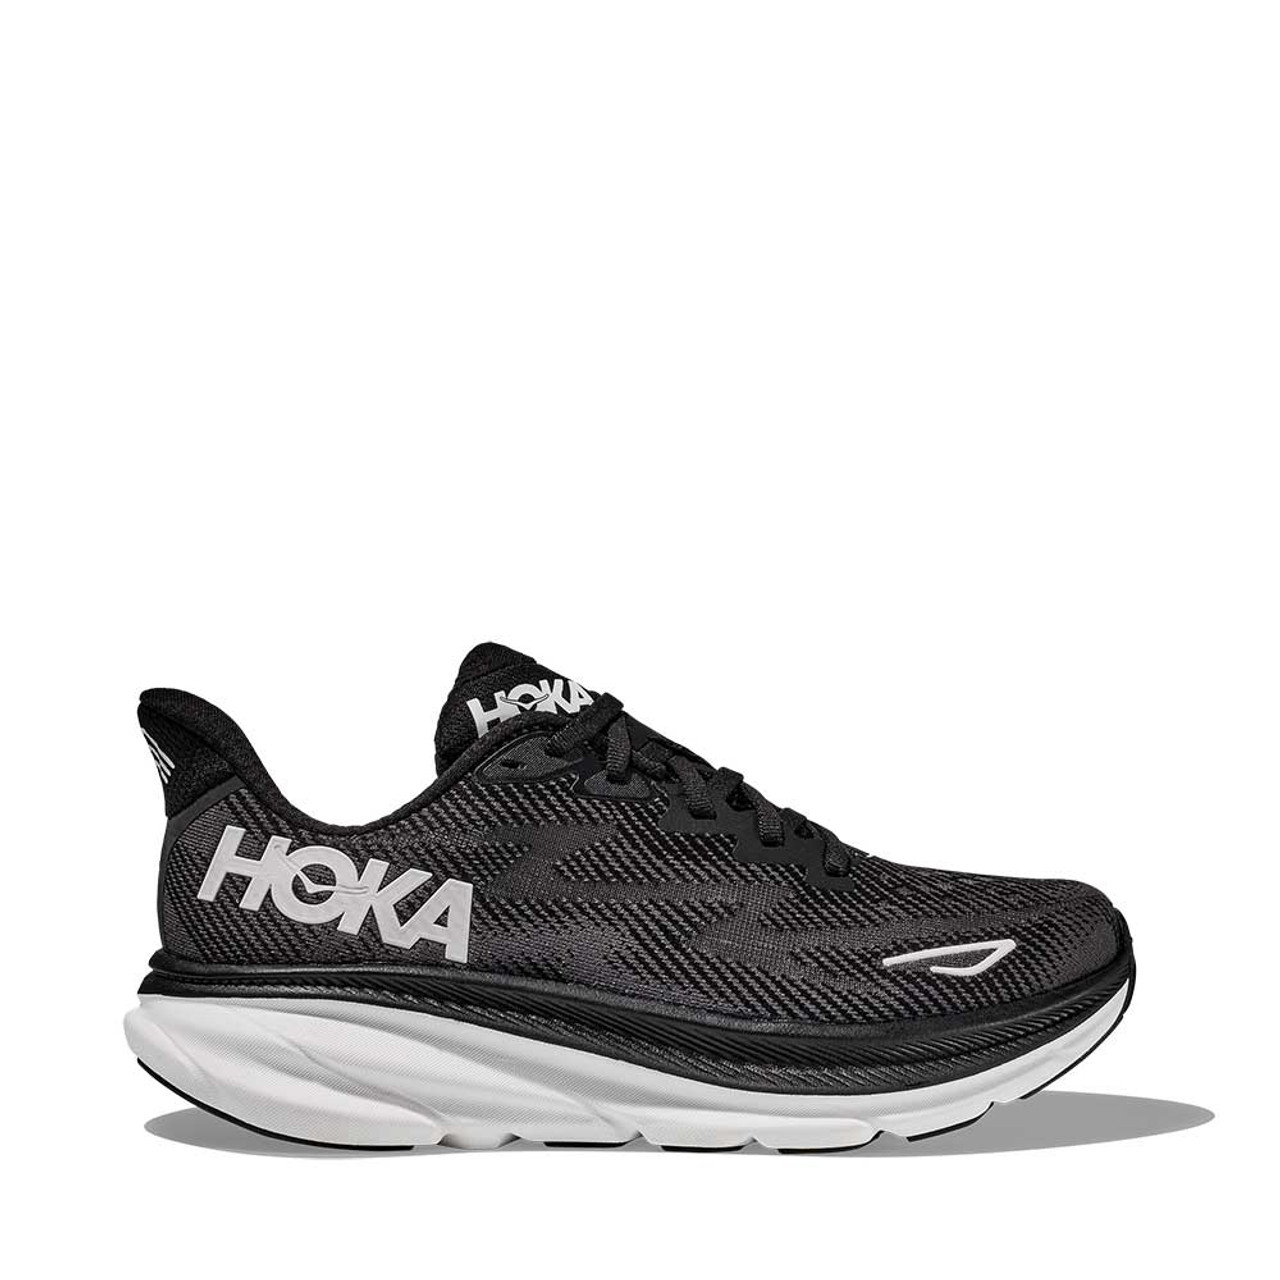 NEW! Hoka One One Womens Trainers Clifton 9 Colors Sizes Low-Top